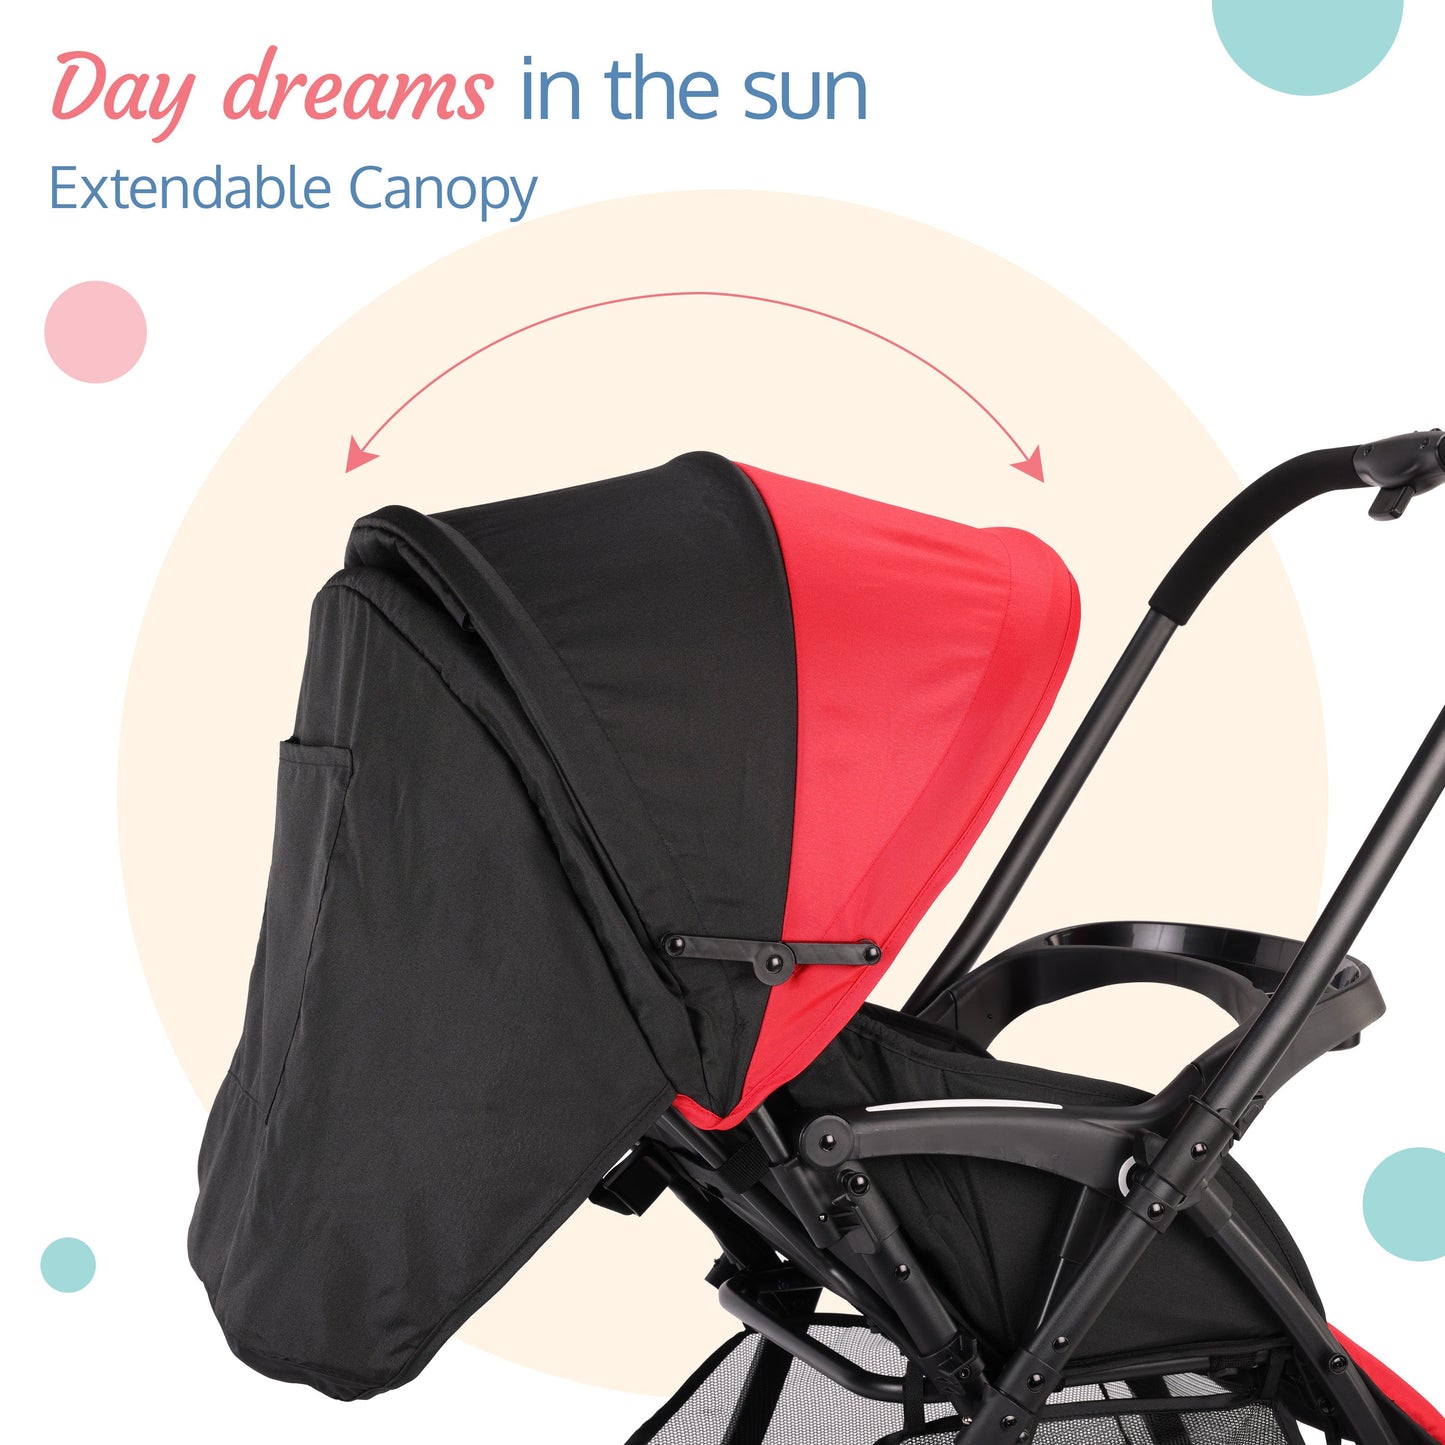 Golf Baby Stroller/Pram with 5 Point Safety Harness, Multi Level Recline & Adjustable footrest, Extendable Canopy, Red & Black